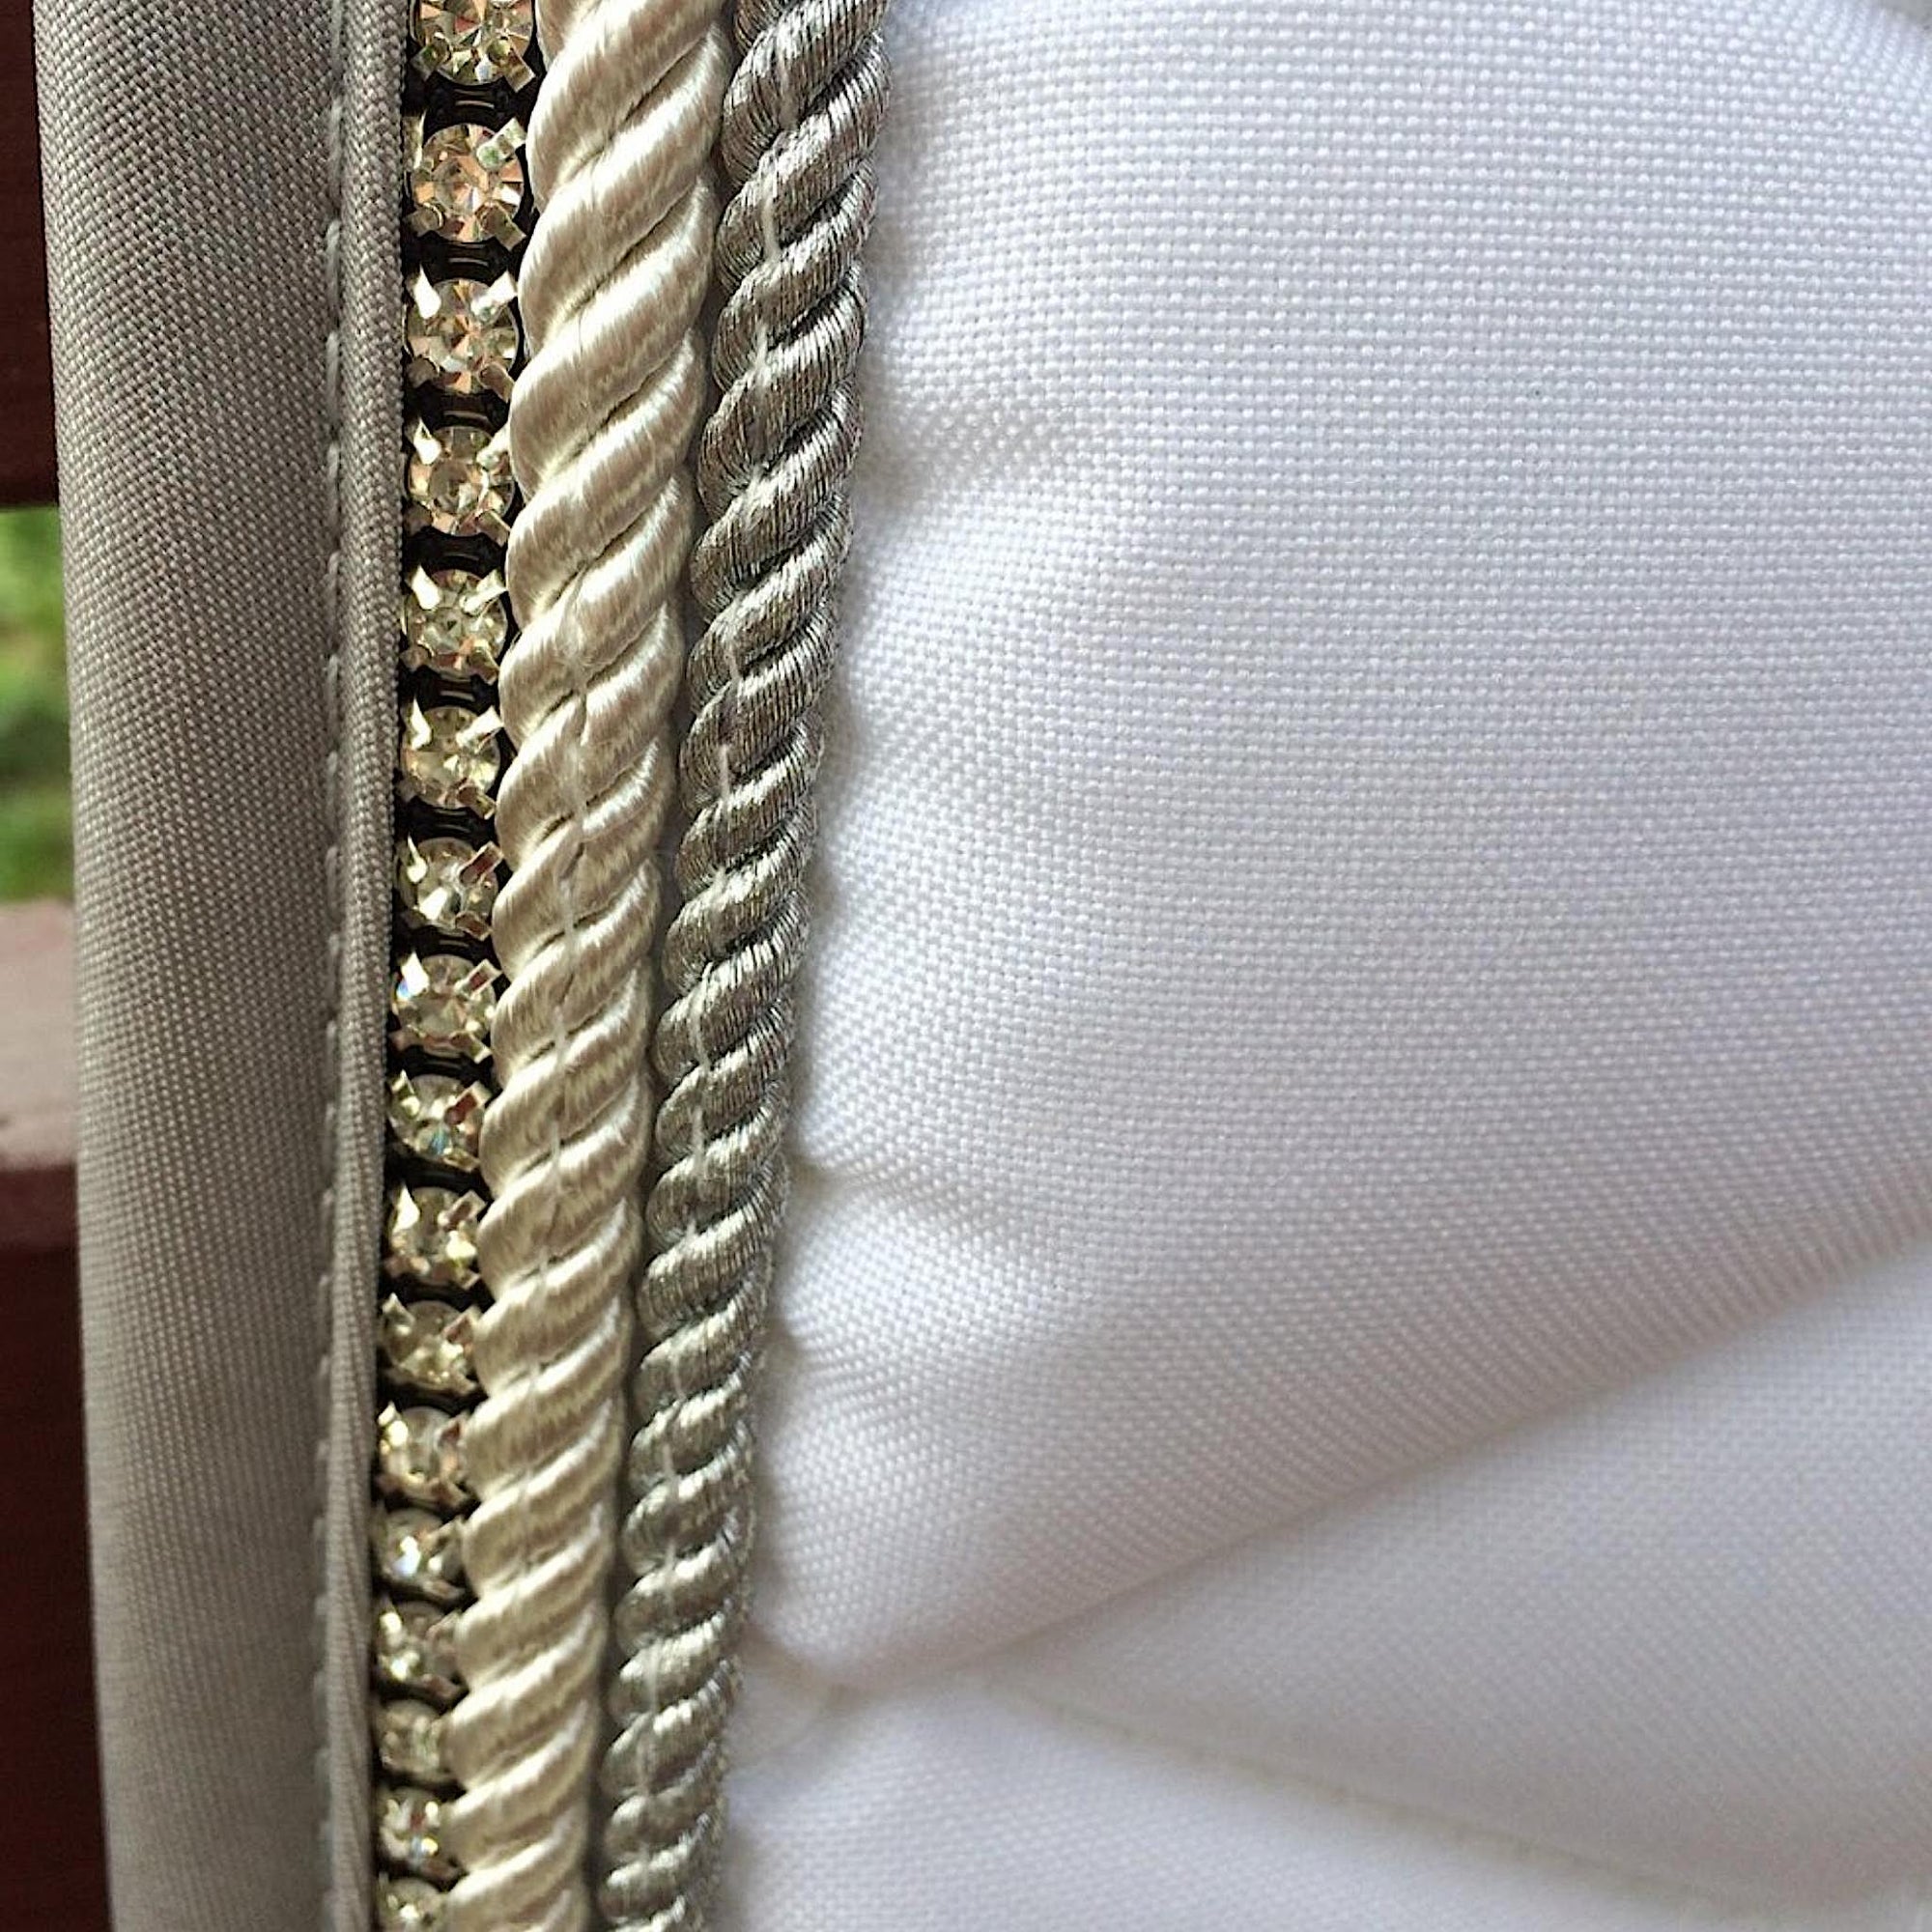 White dressage saddle pad with white keepers and clear diamante row trim.